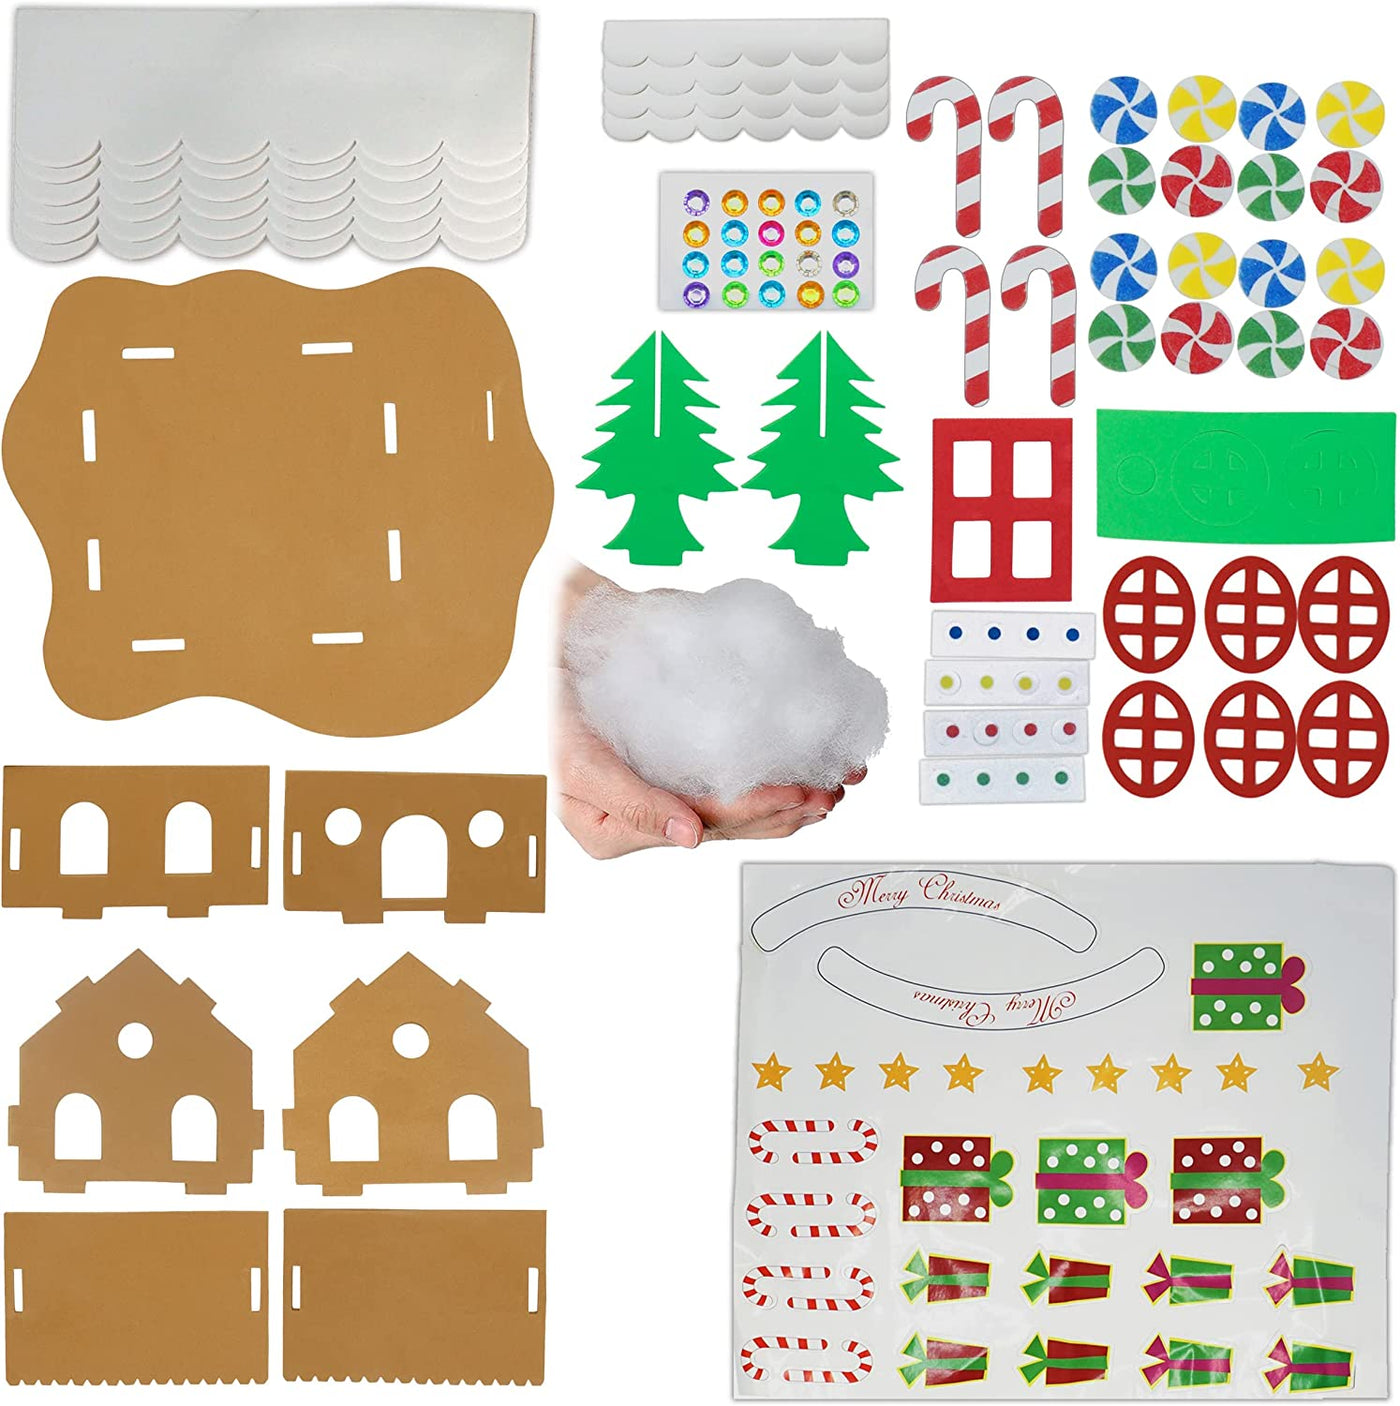 4E's Novelty Foam Gingerbread House Craft Kit (1 Pack) for Kids with Foam Stickers, Build & Decorate it Yourself DIY Christmas Crafts for Kids & Toddlers